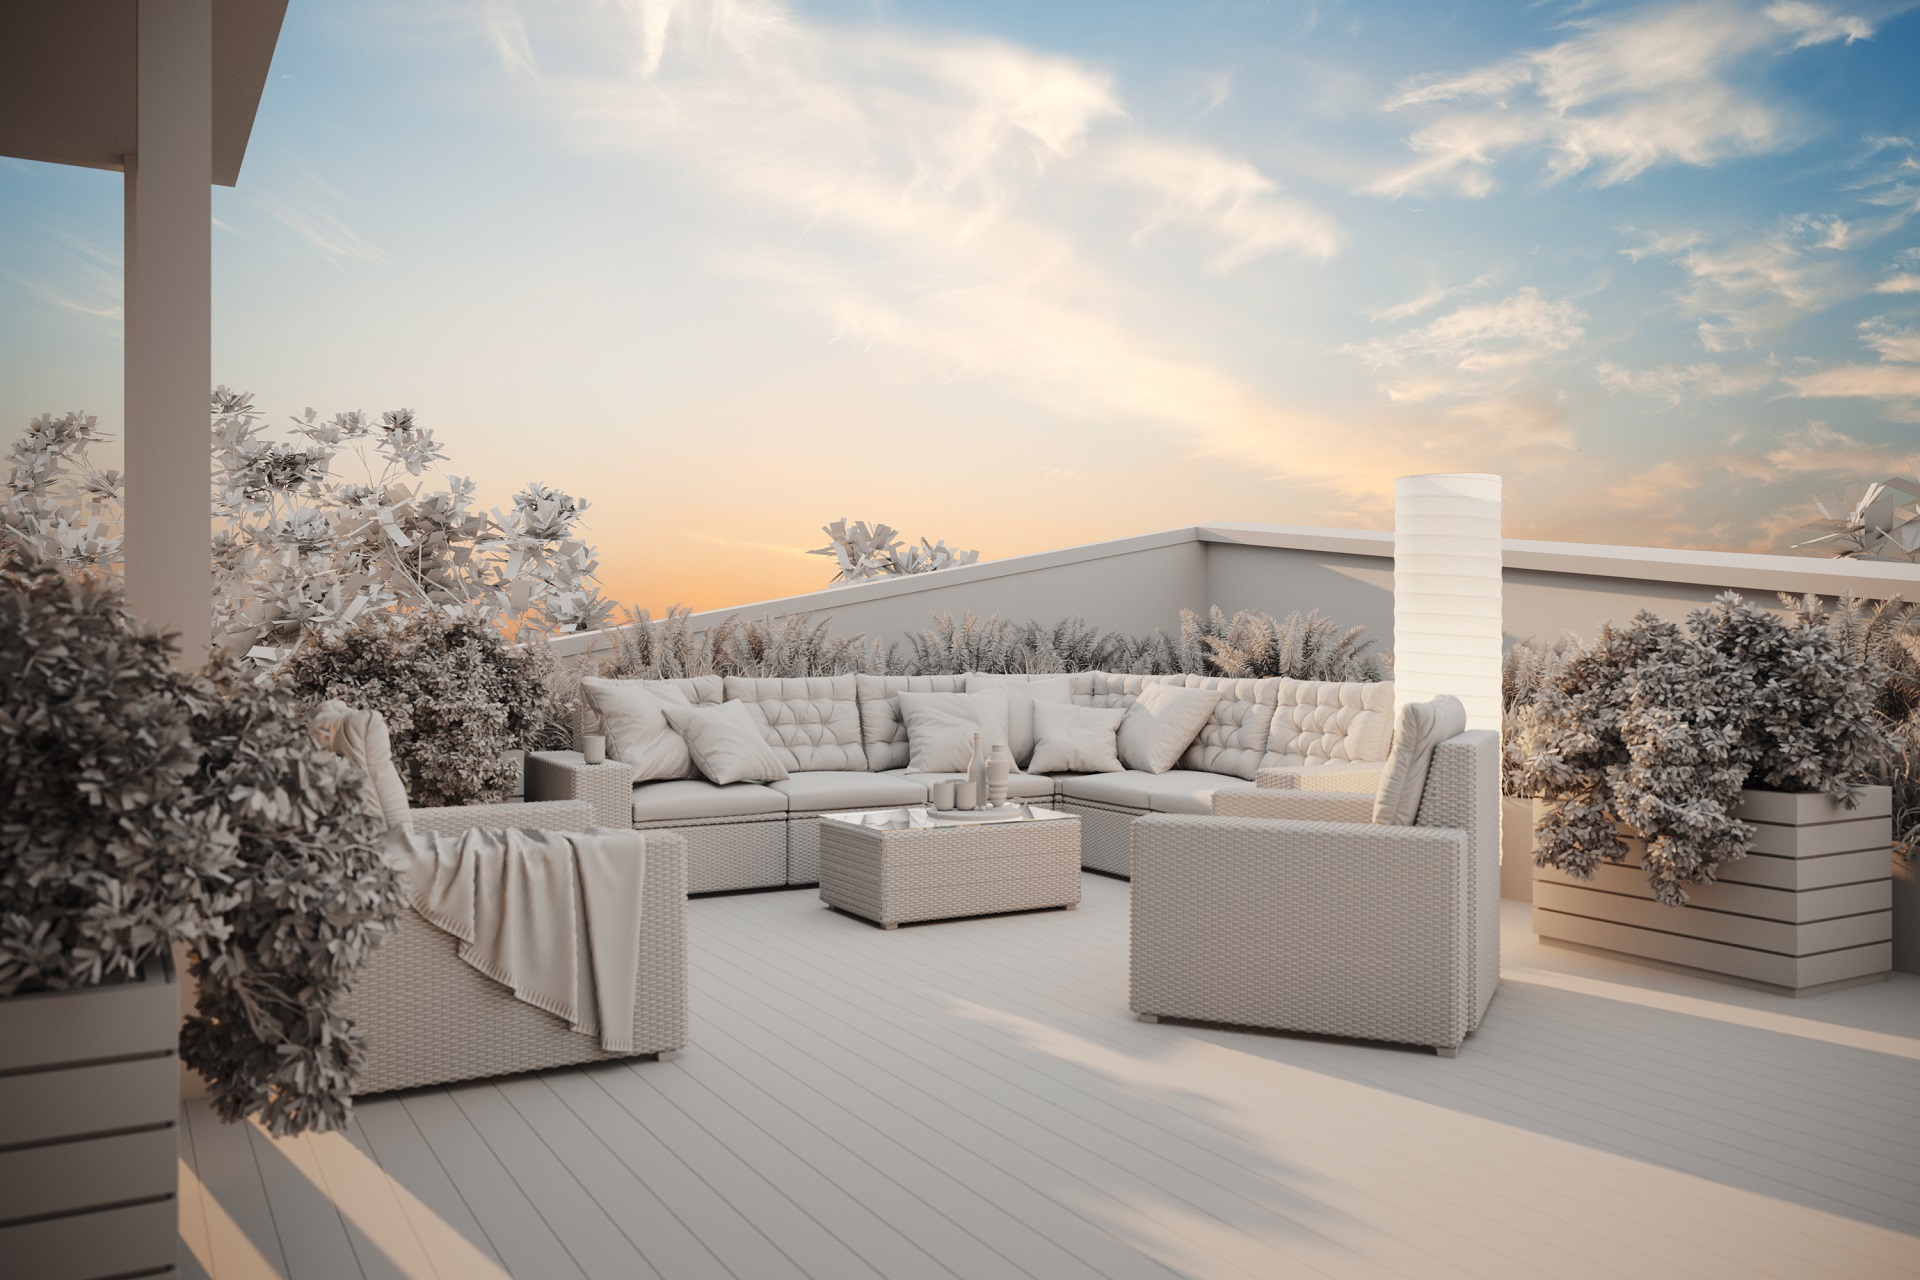 CGI for a Rooftop Terrace in Greyscale